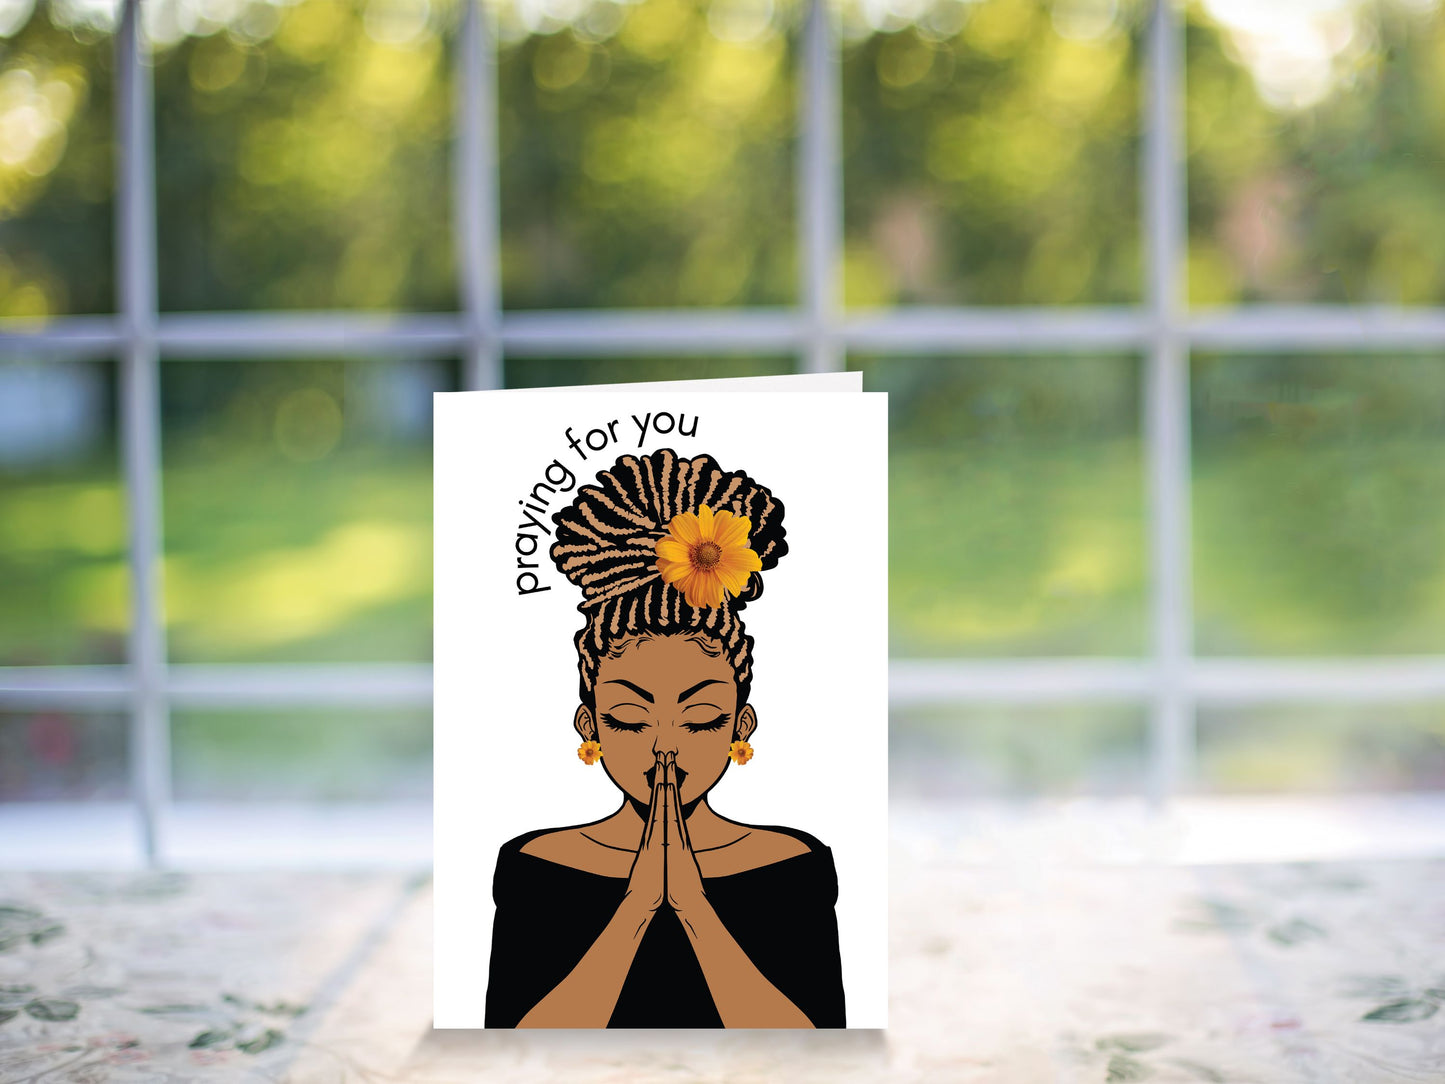 Religious Get Well Card| African American Greeting Card| Black Woman Praying for You| Thinking of You Card